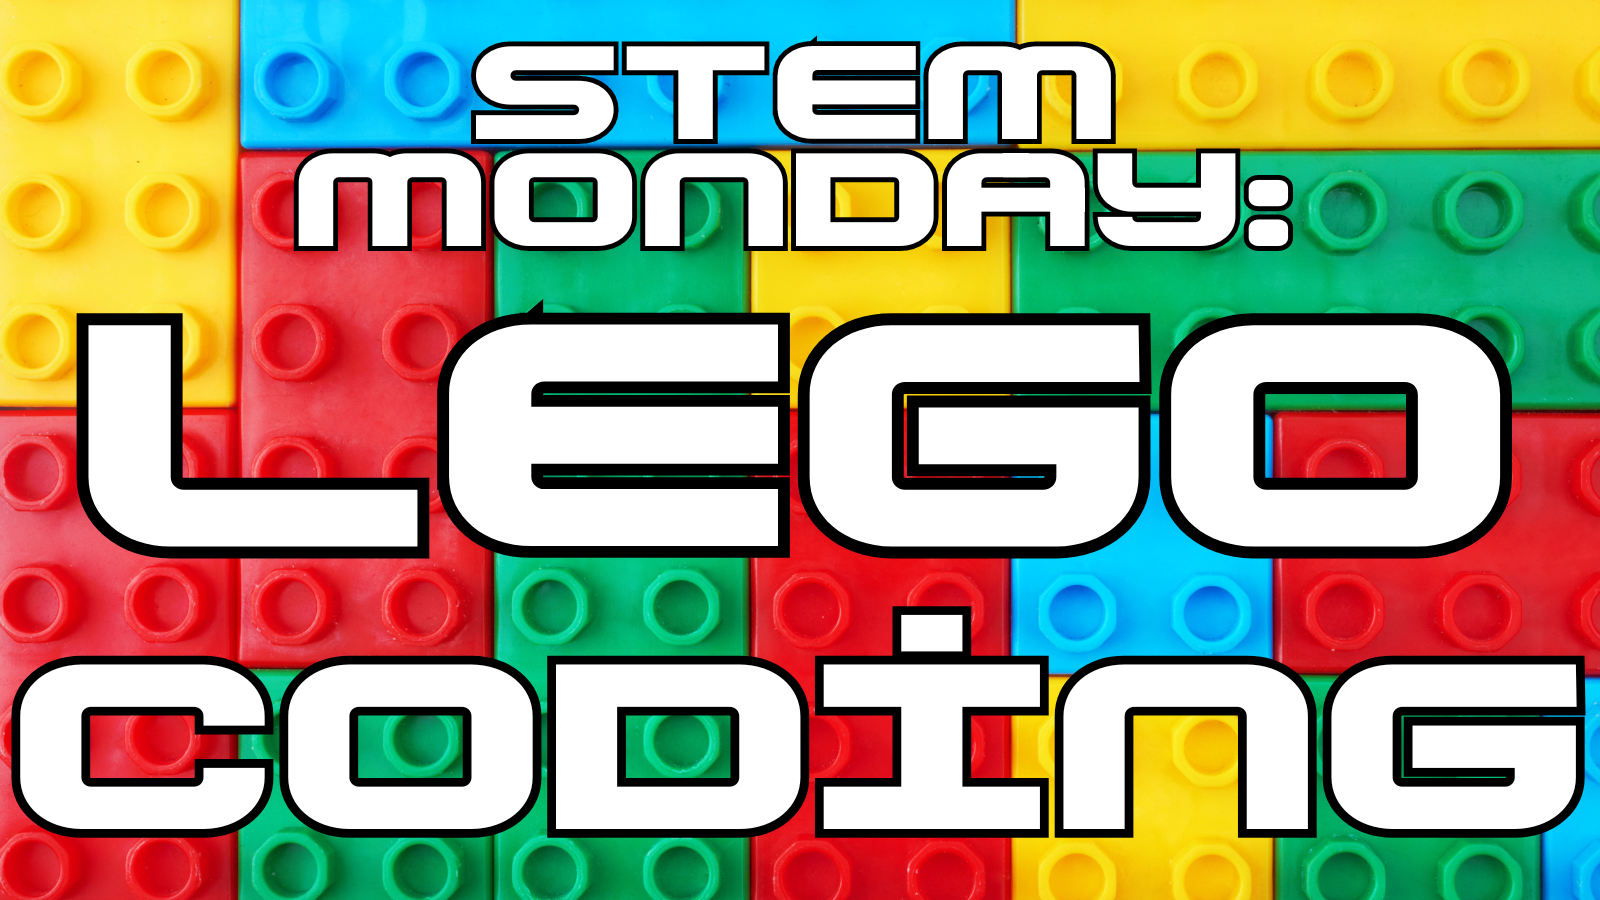 Multicolored lego background with Text: STEM MONDAY: Lego Coding